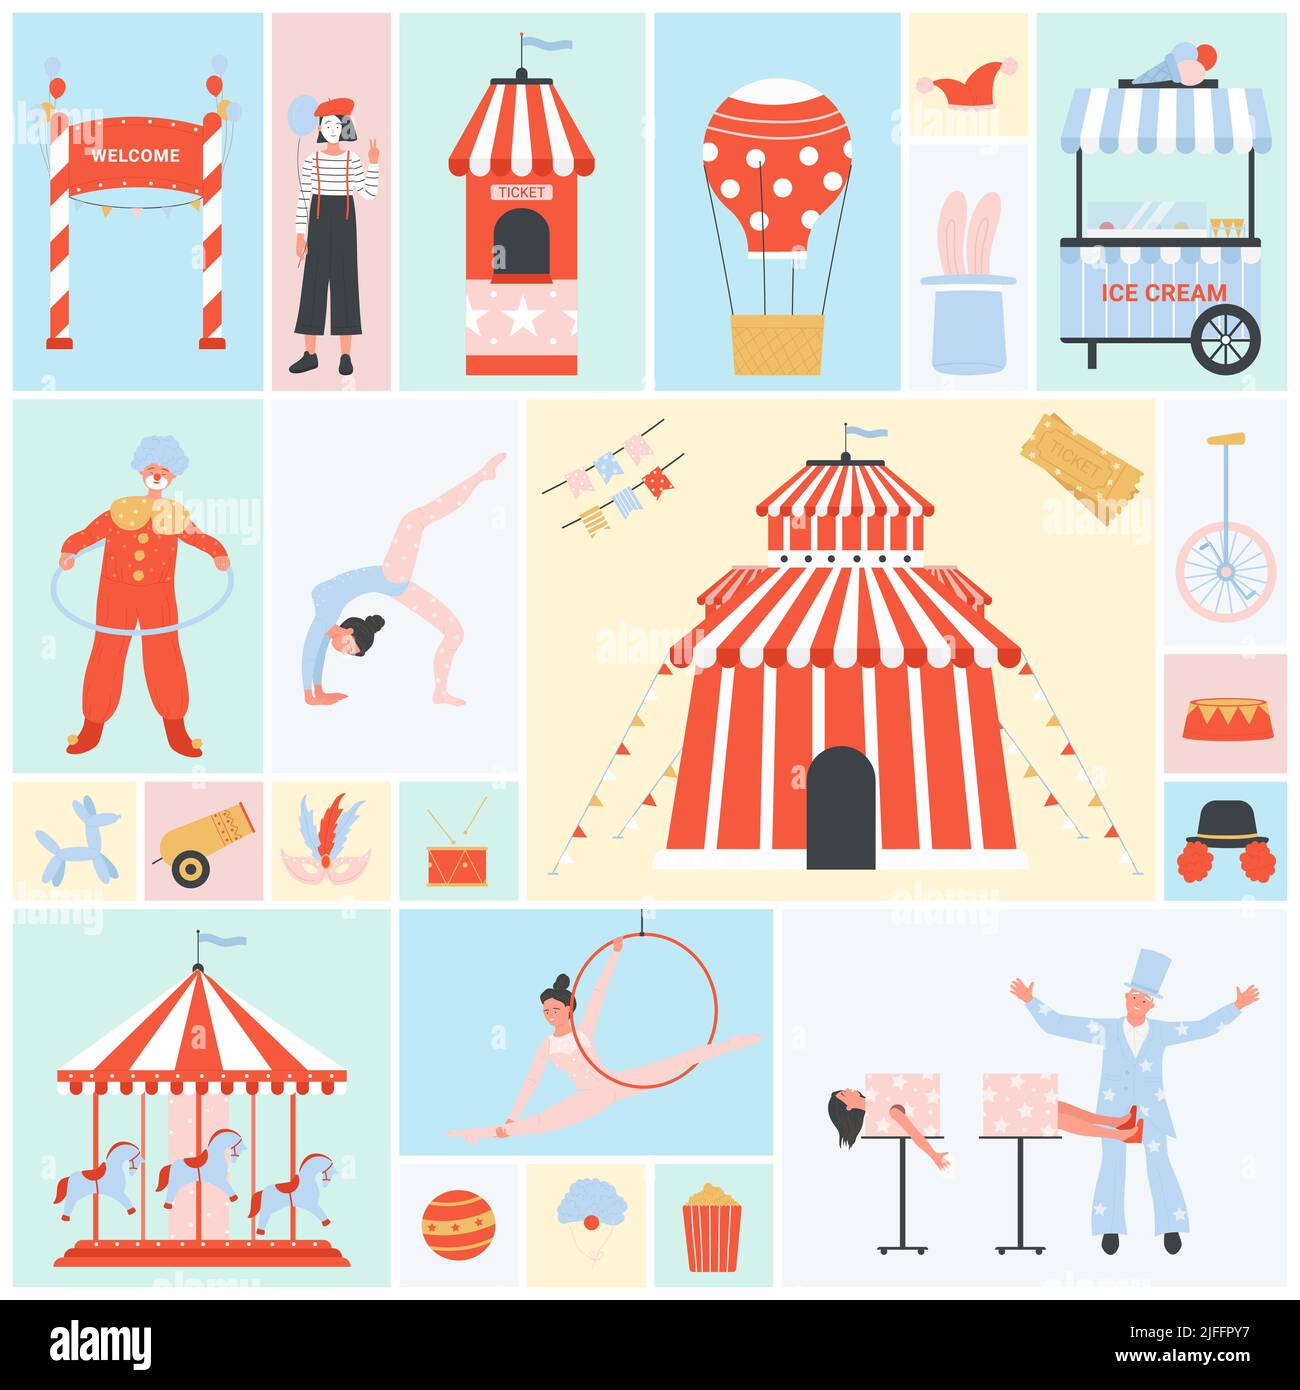 Cute circus set vector illustration. Cartoon clown, acrobat and magician, chapiteau tent, carousel, booth with tickets and ice cream in square collage background. Amusement park, carnival fair concept Stock Vector